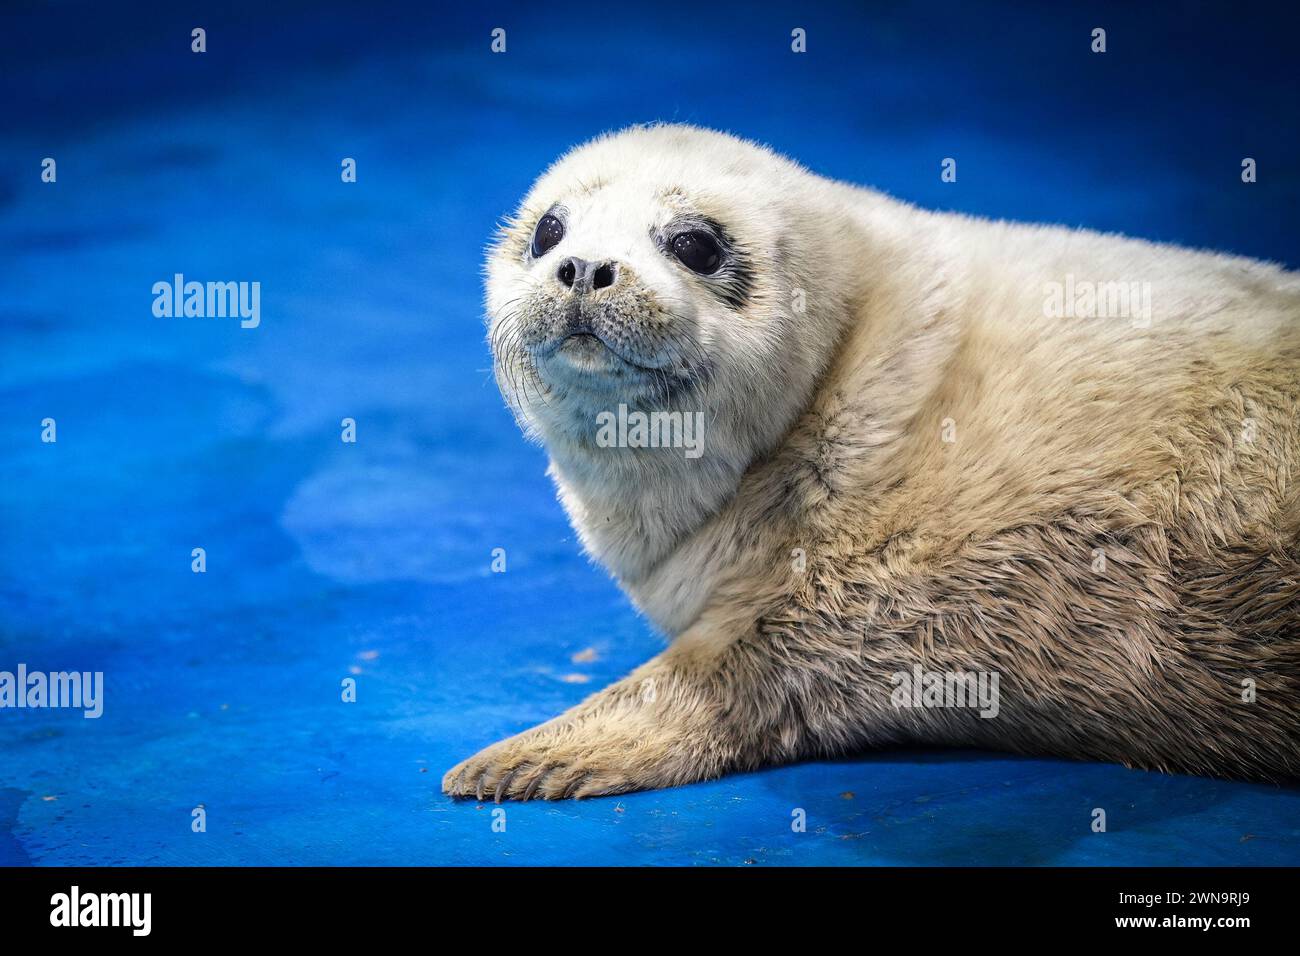 (240301) -- DALIAN, March 1, 2024 (Xinhua) -- This photo taken on Feb. 28, 2024 shows a spotted seal pup born in 2024 at Dalian Sunasia seal breeding base in Dalian, northeast China's Liaoning Province. Between November and March in the coming year is the breeding season for spotted seals, and it is also the busiest time for Dr. Luo Jun's team at the Dalian Sunasia Marine Biology Institute. 'Every year, our institute breeds around 10 spotted seal pups,' says Dr. Luo. During this period, Dr. Luo and his team members will test the dung for both seal mothers and pups, examine water samples, Stock Photo